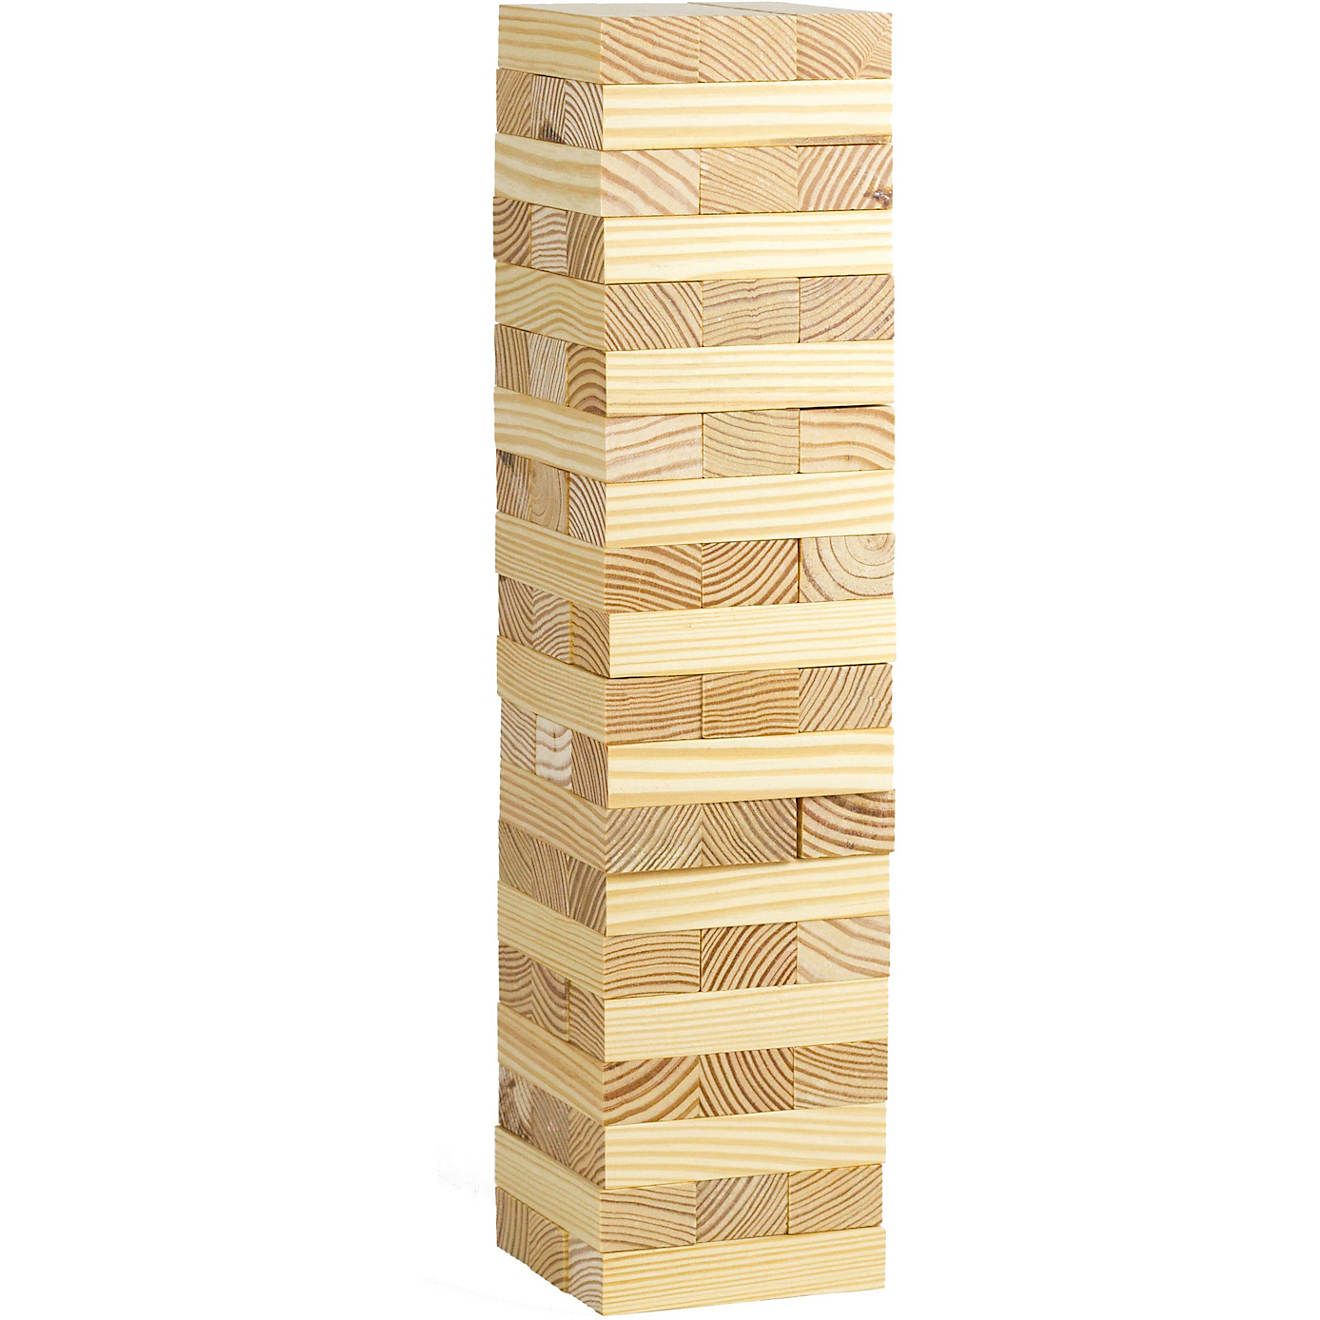 Professor Puzzle Giant Topping Tower | Academy Sports + Outdoors